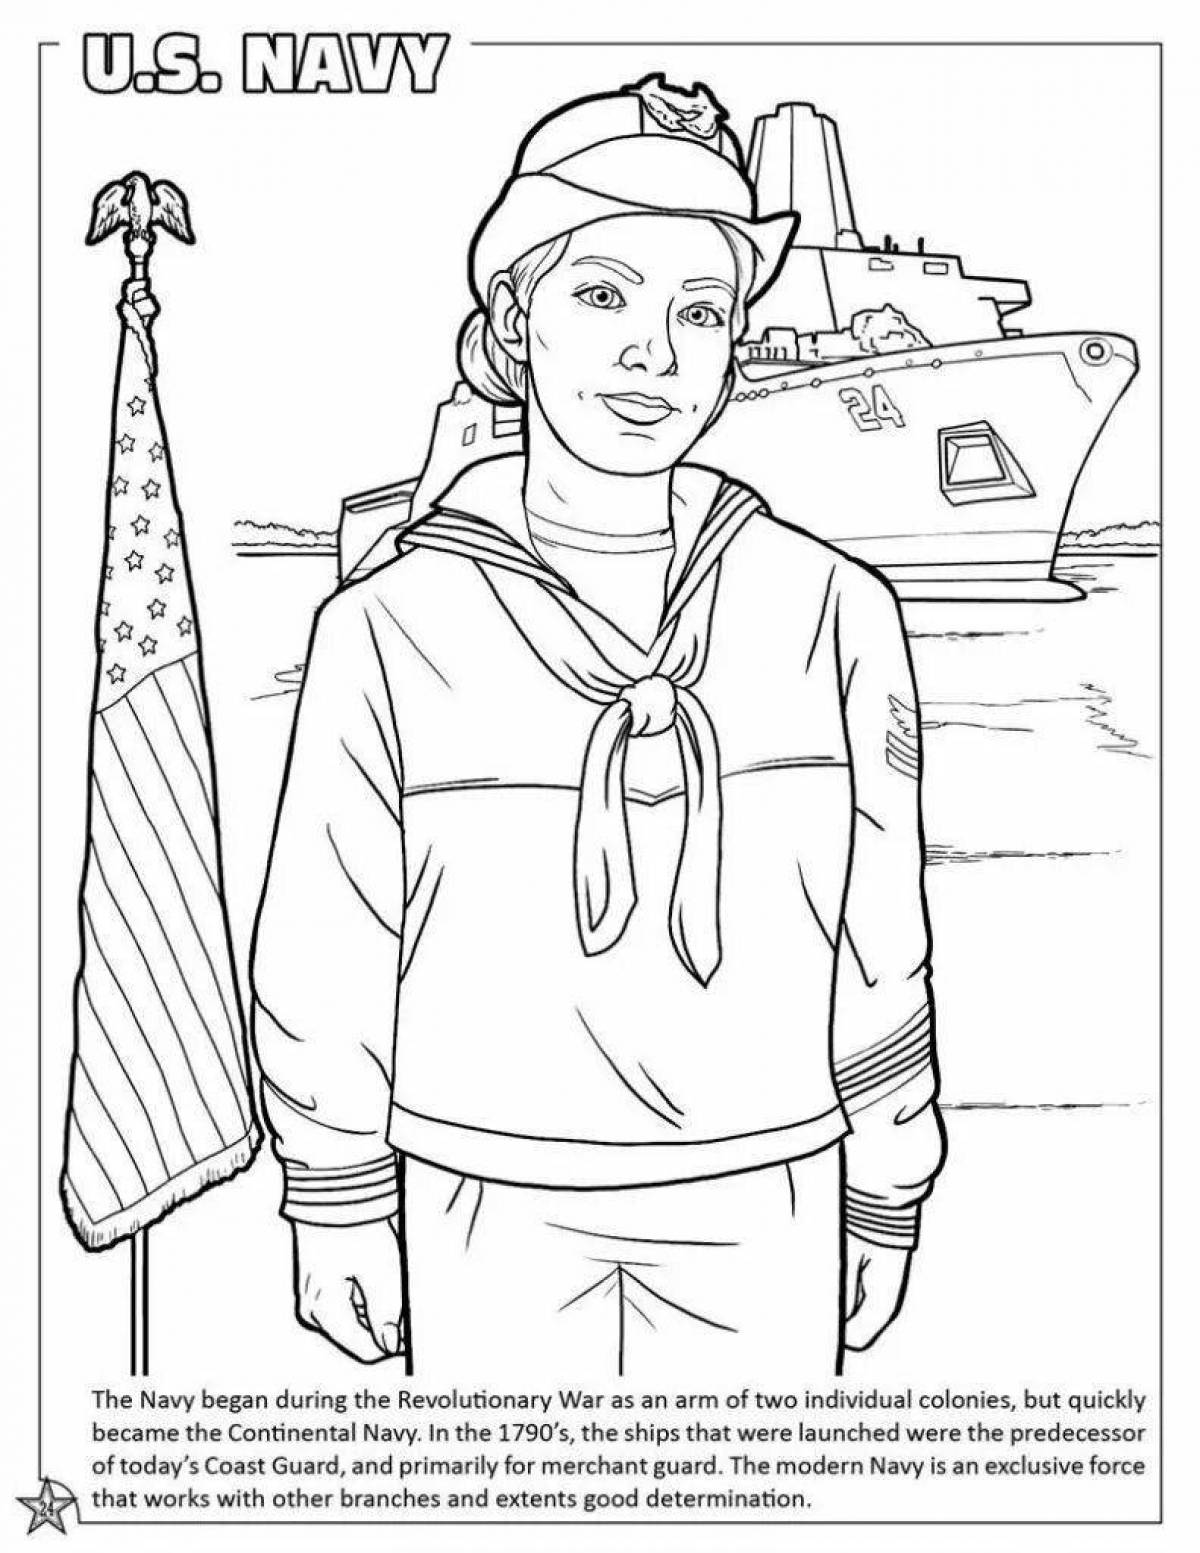 Coloring book nice military profession